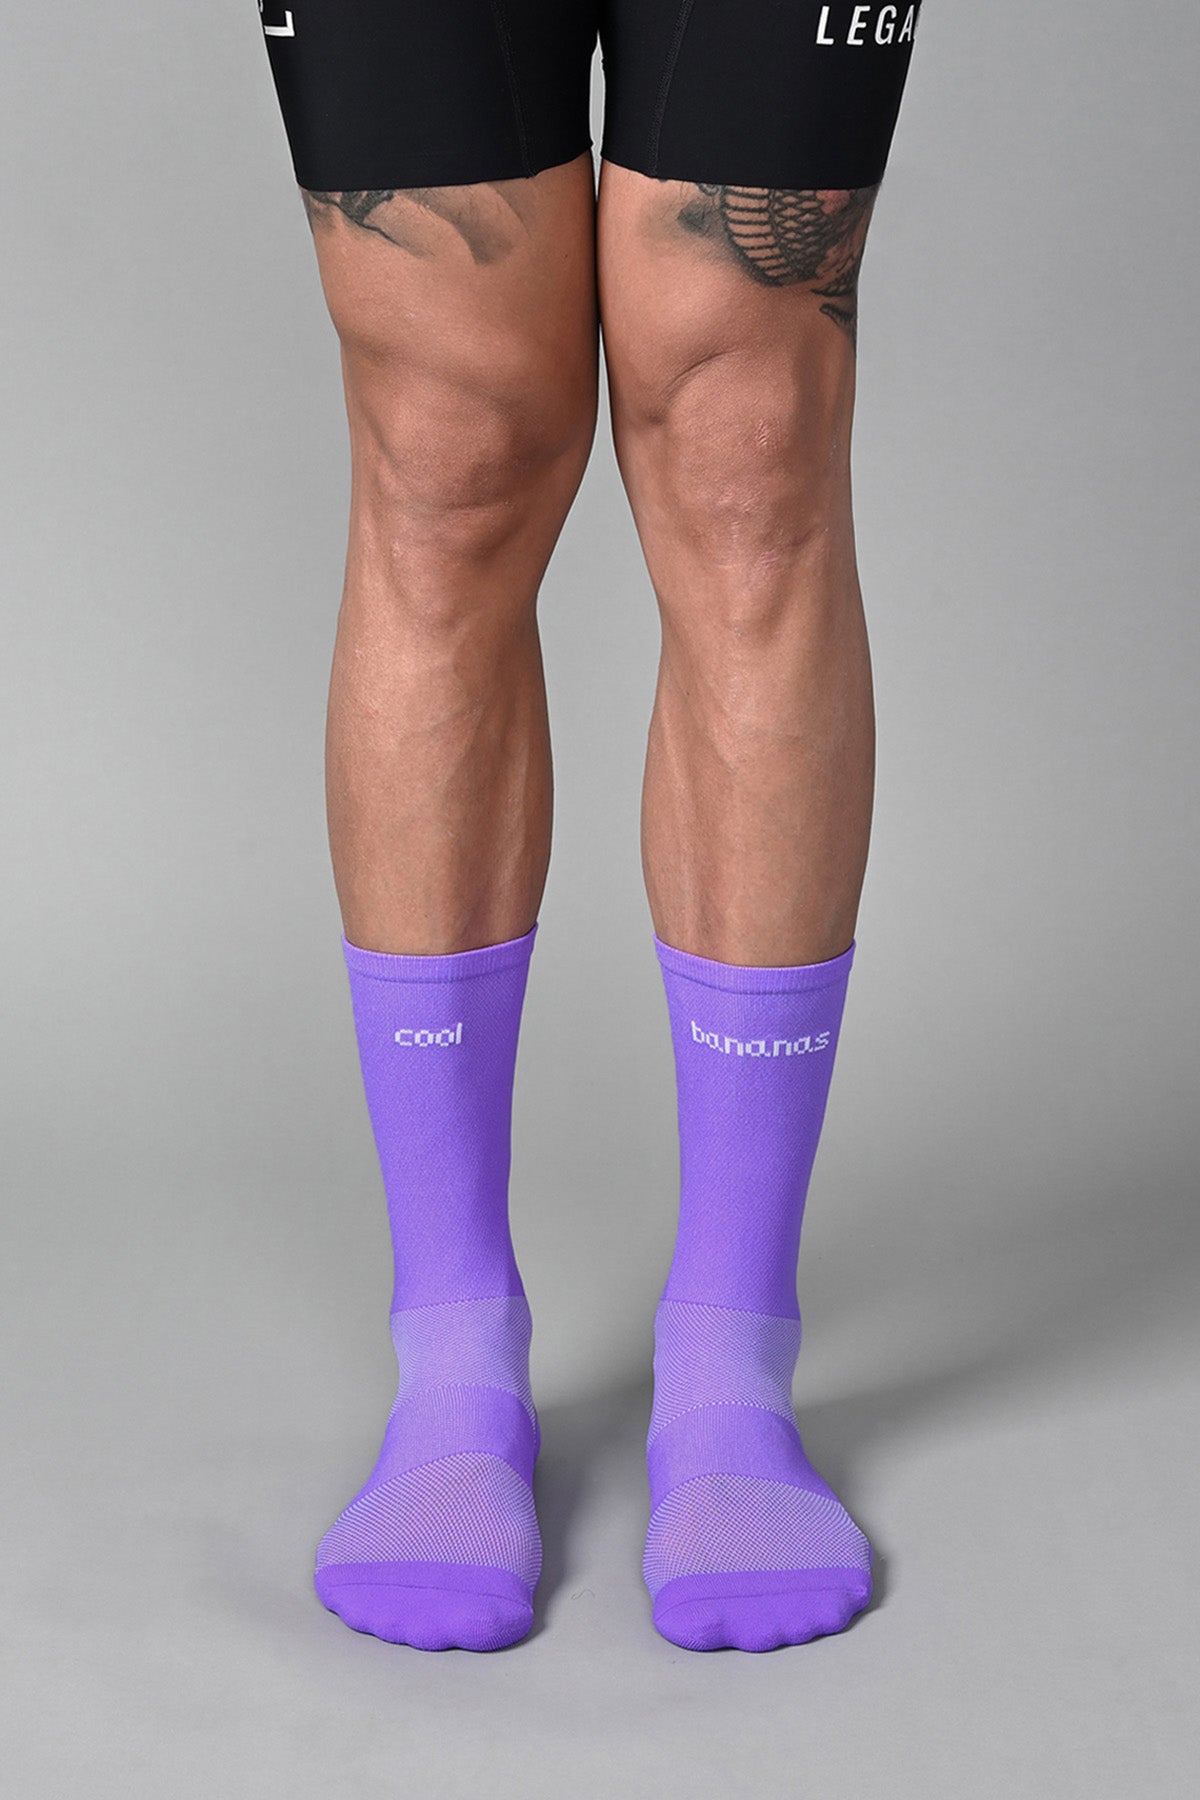 COOL BANANAS - PURPLE FRONT | BEST CYCLING SOCKS